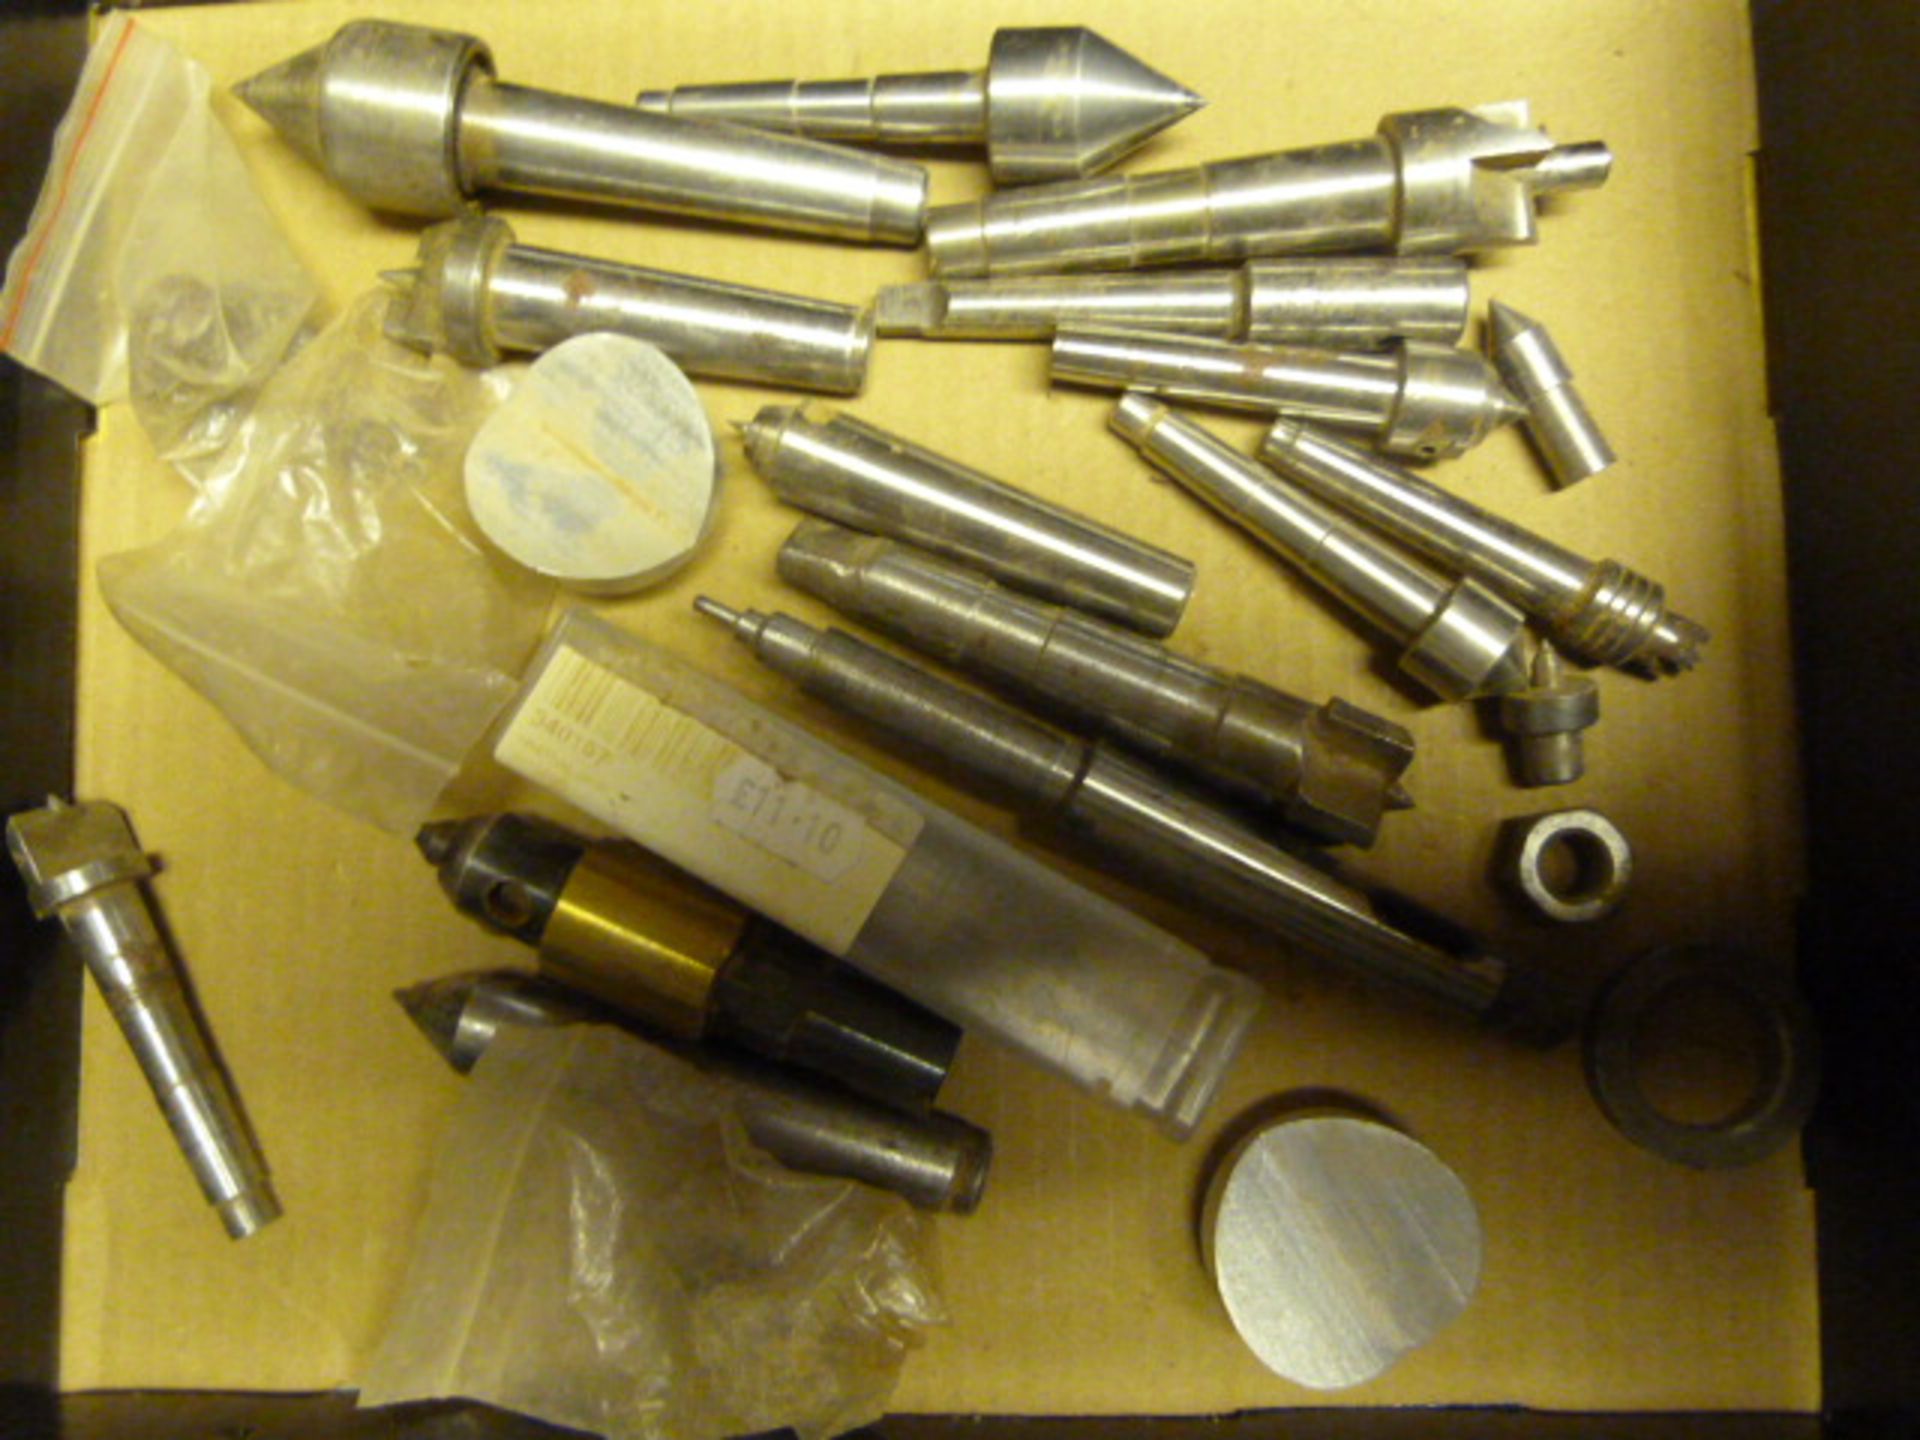 Box of Lathe Centers and Cutters